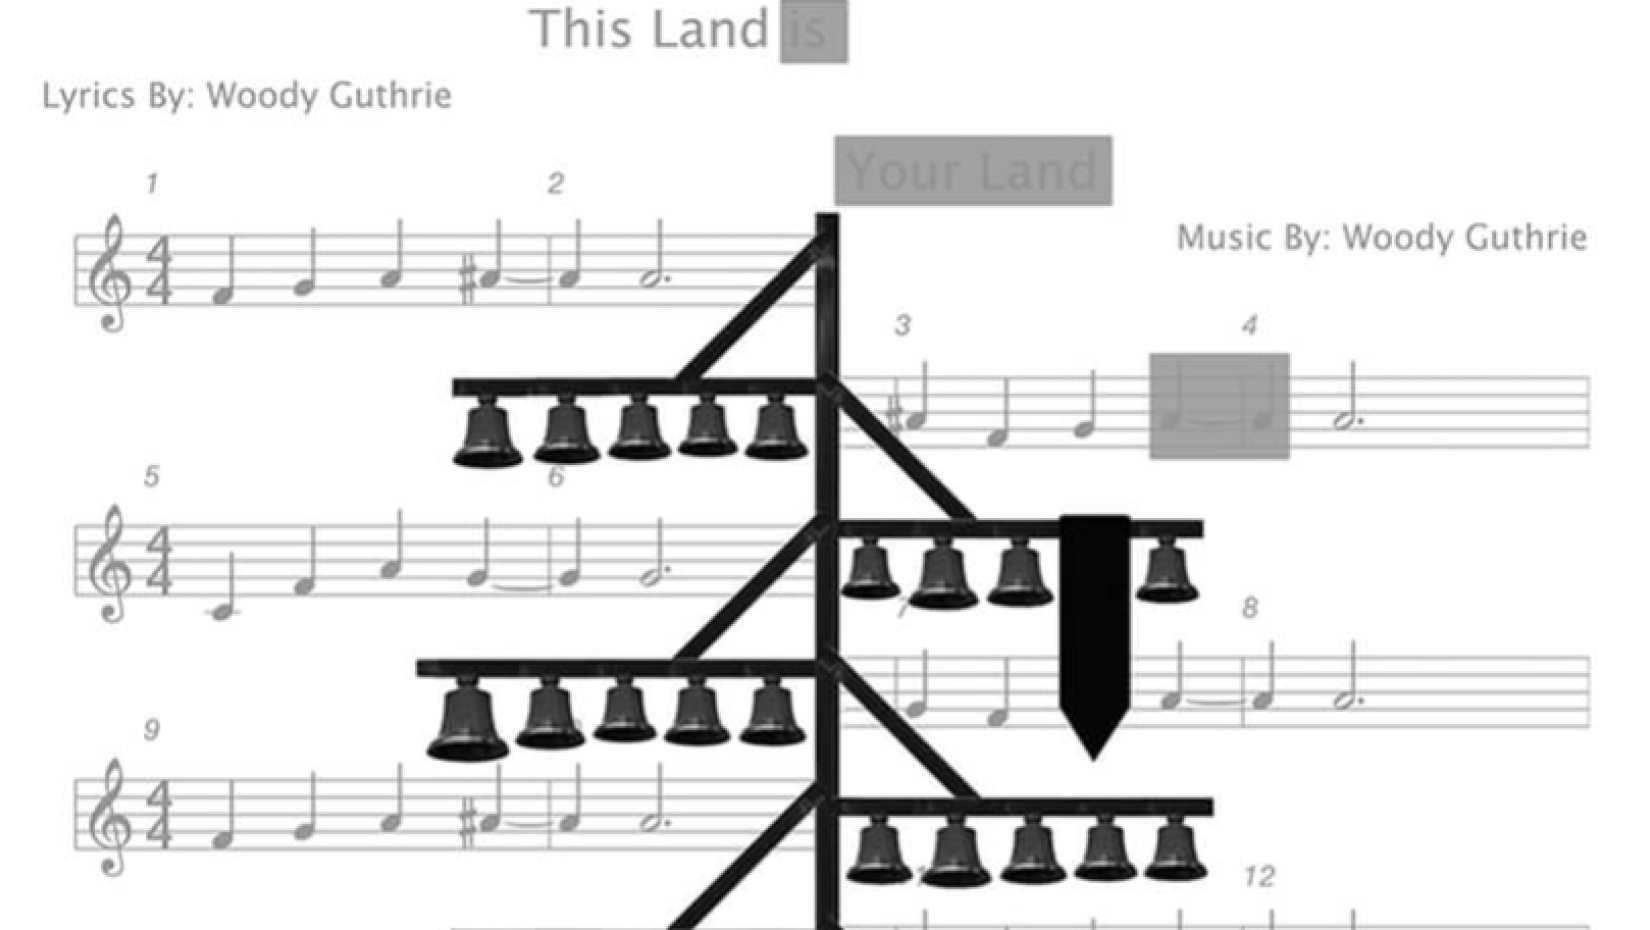 Illustration of a bell tree with one bell replaced by a black flag and sheet music in the background